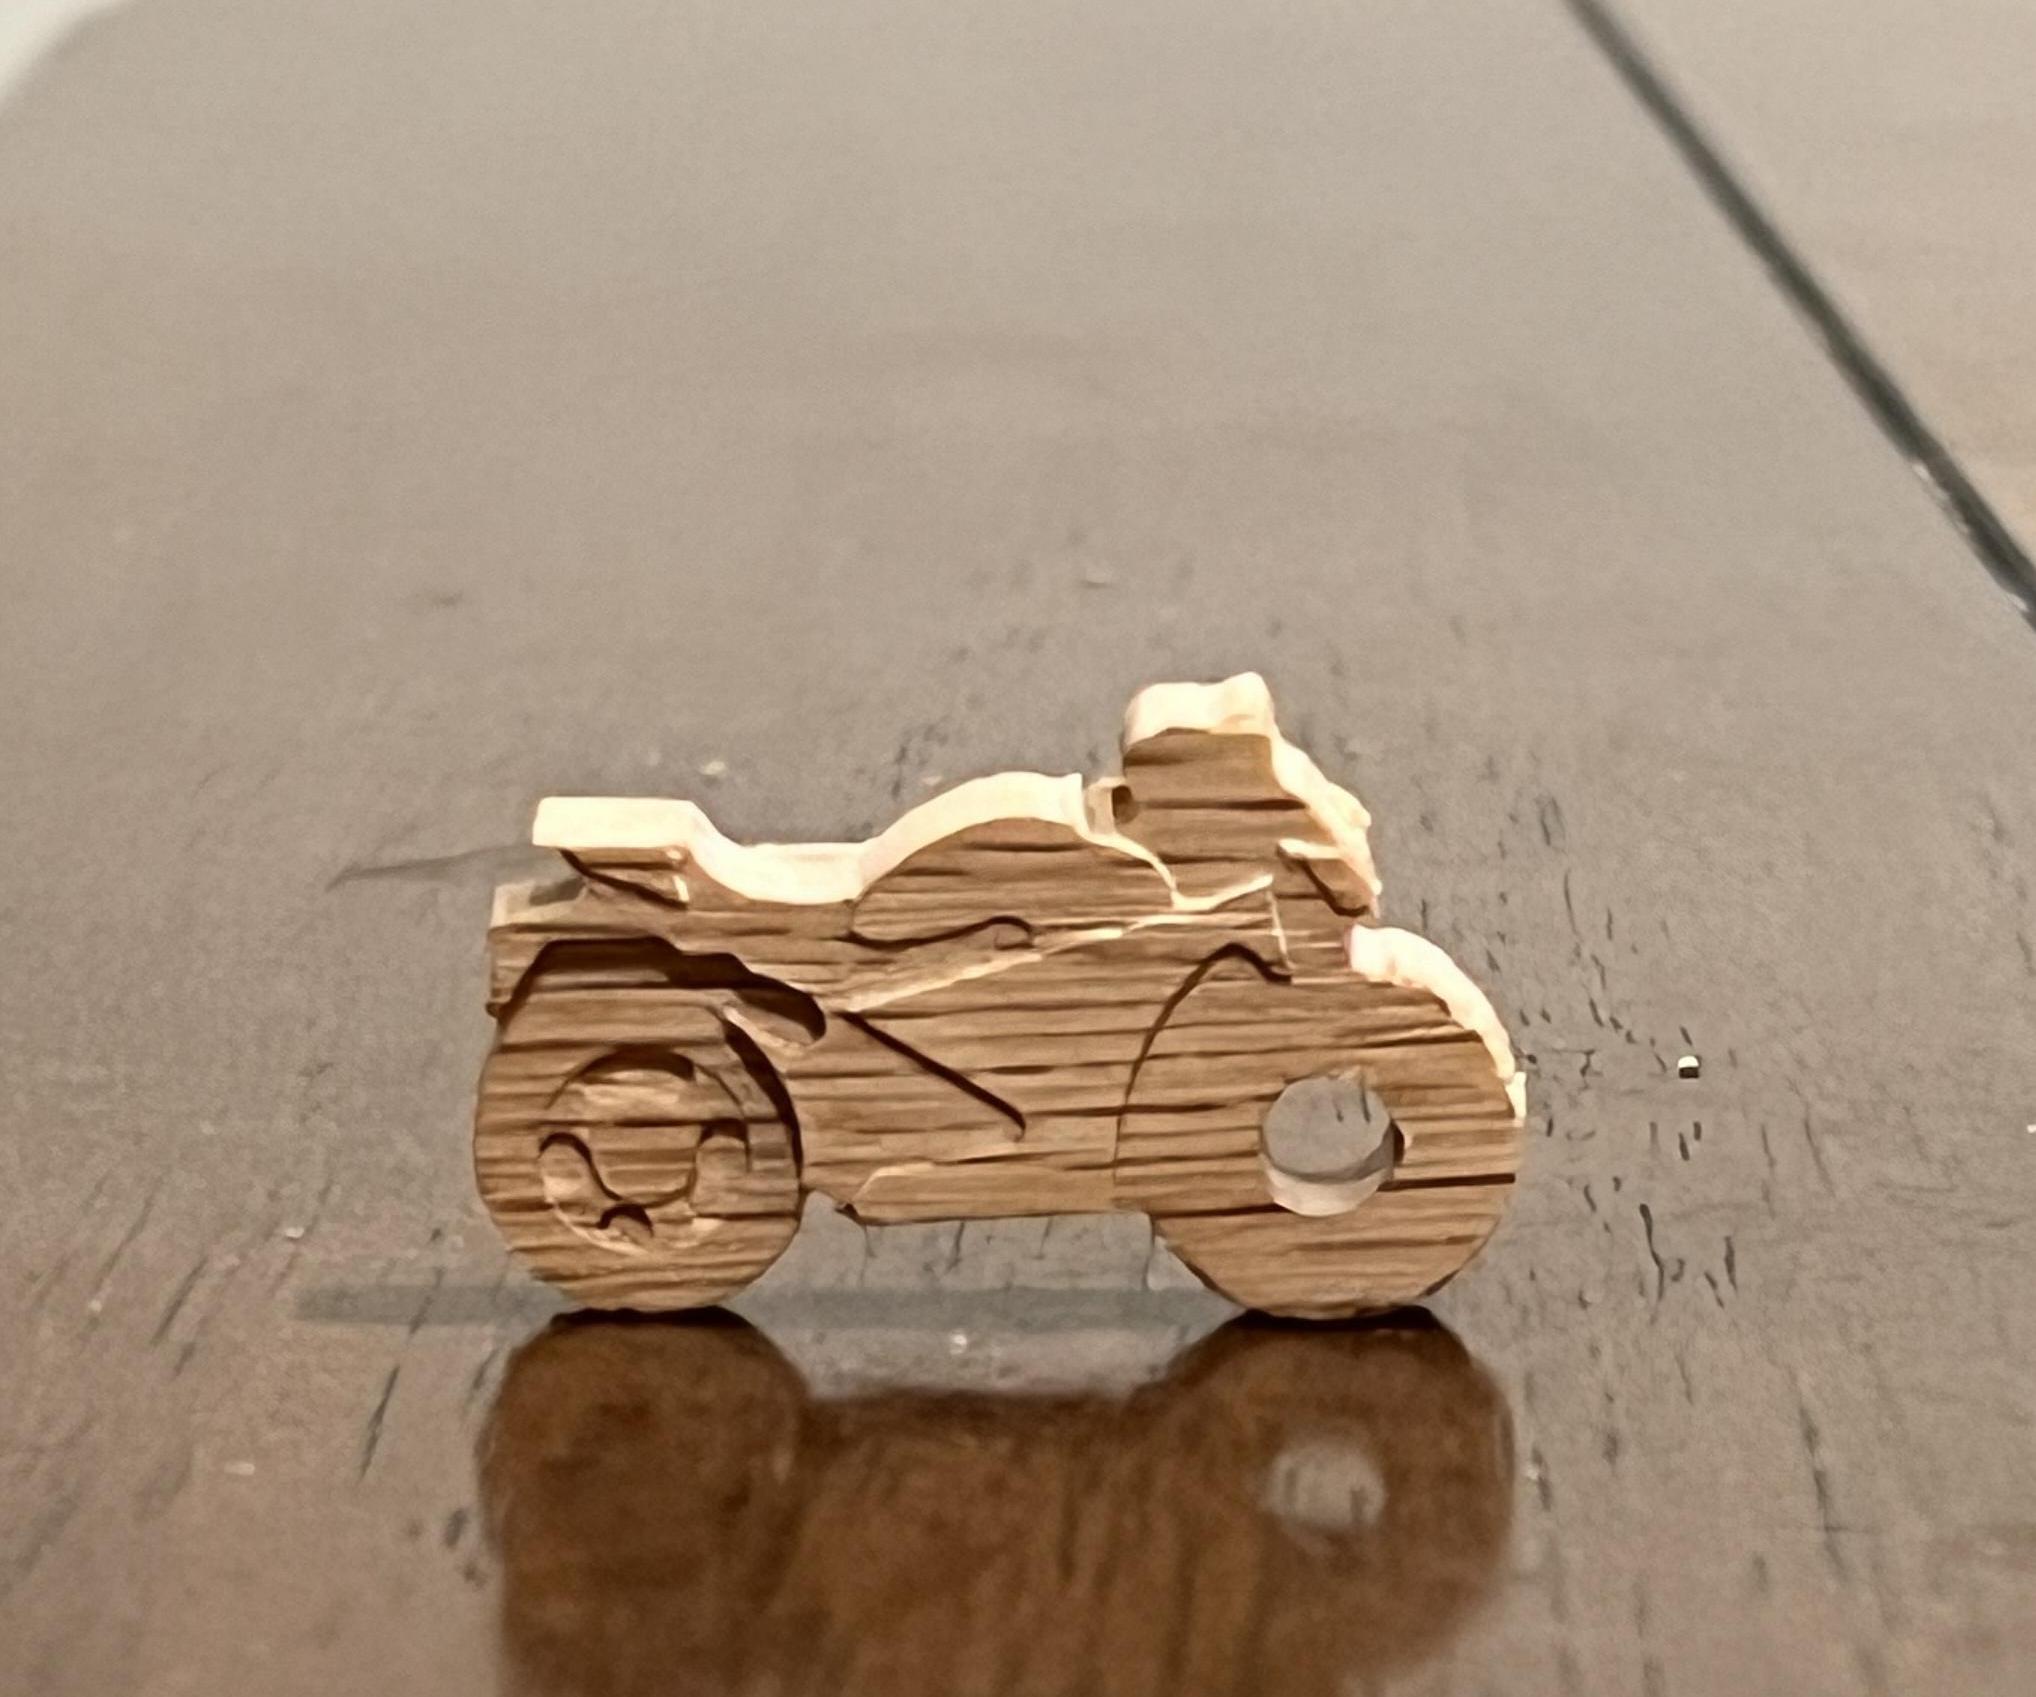 Wooden Motorcycle Keychain: a Beginner Friendly Introduction to CNC Routing